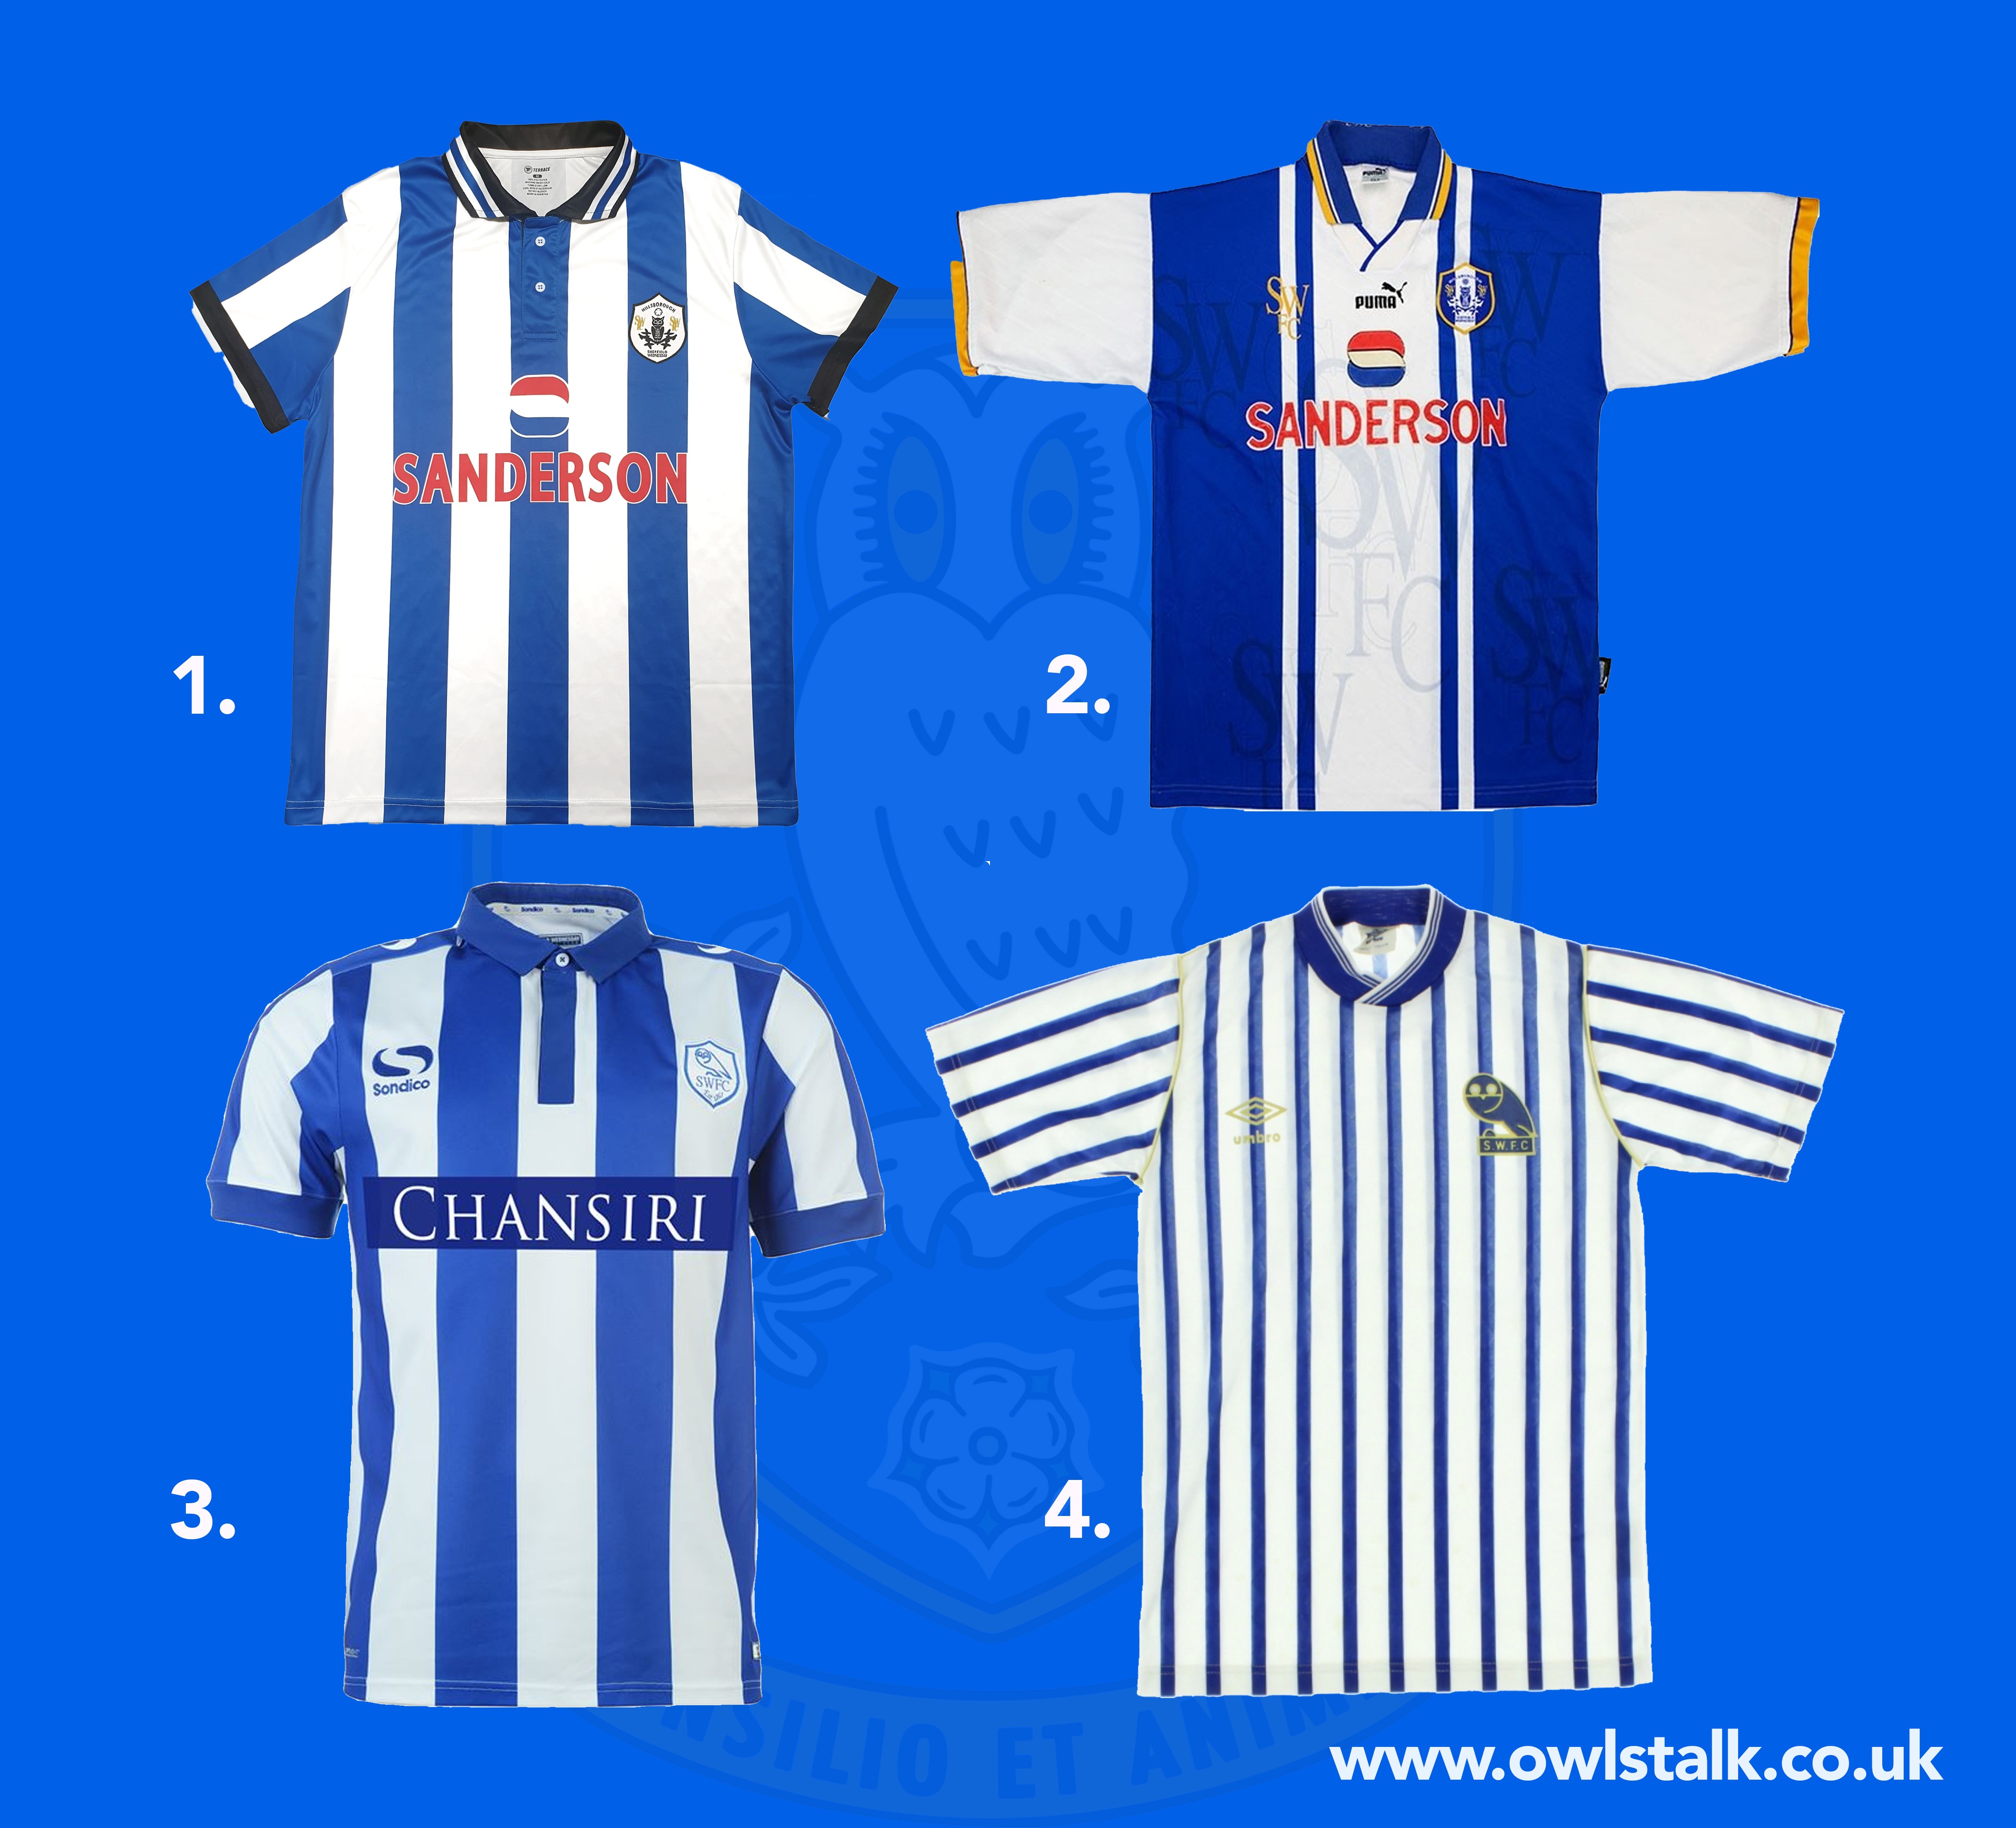 Best Sheffield Wednesday shirt of all time?